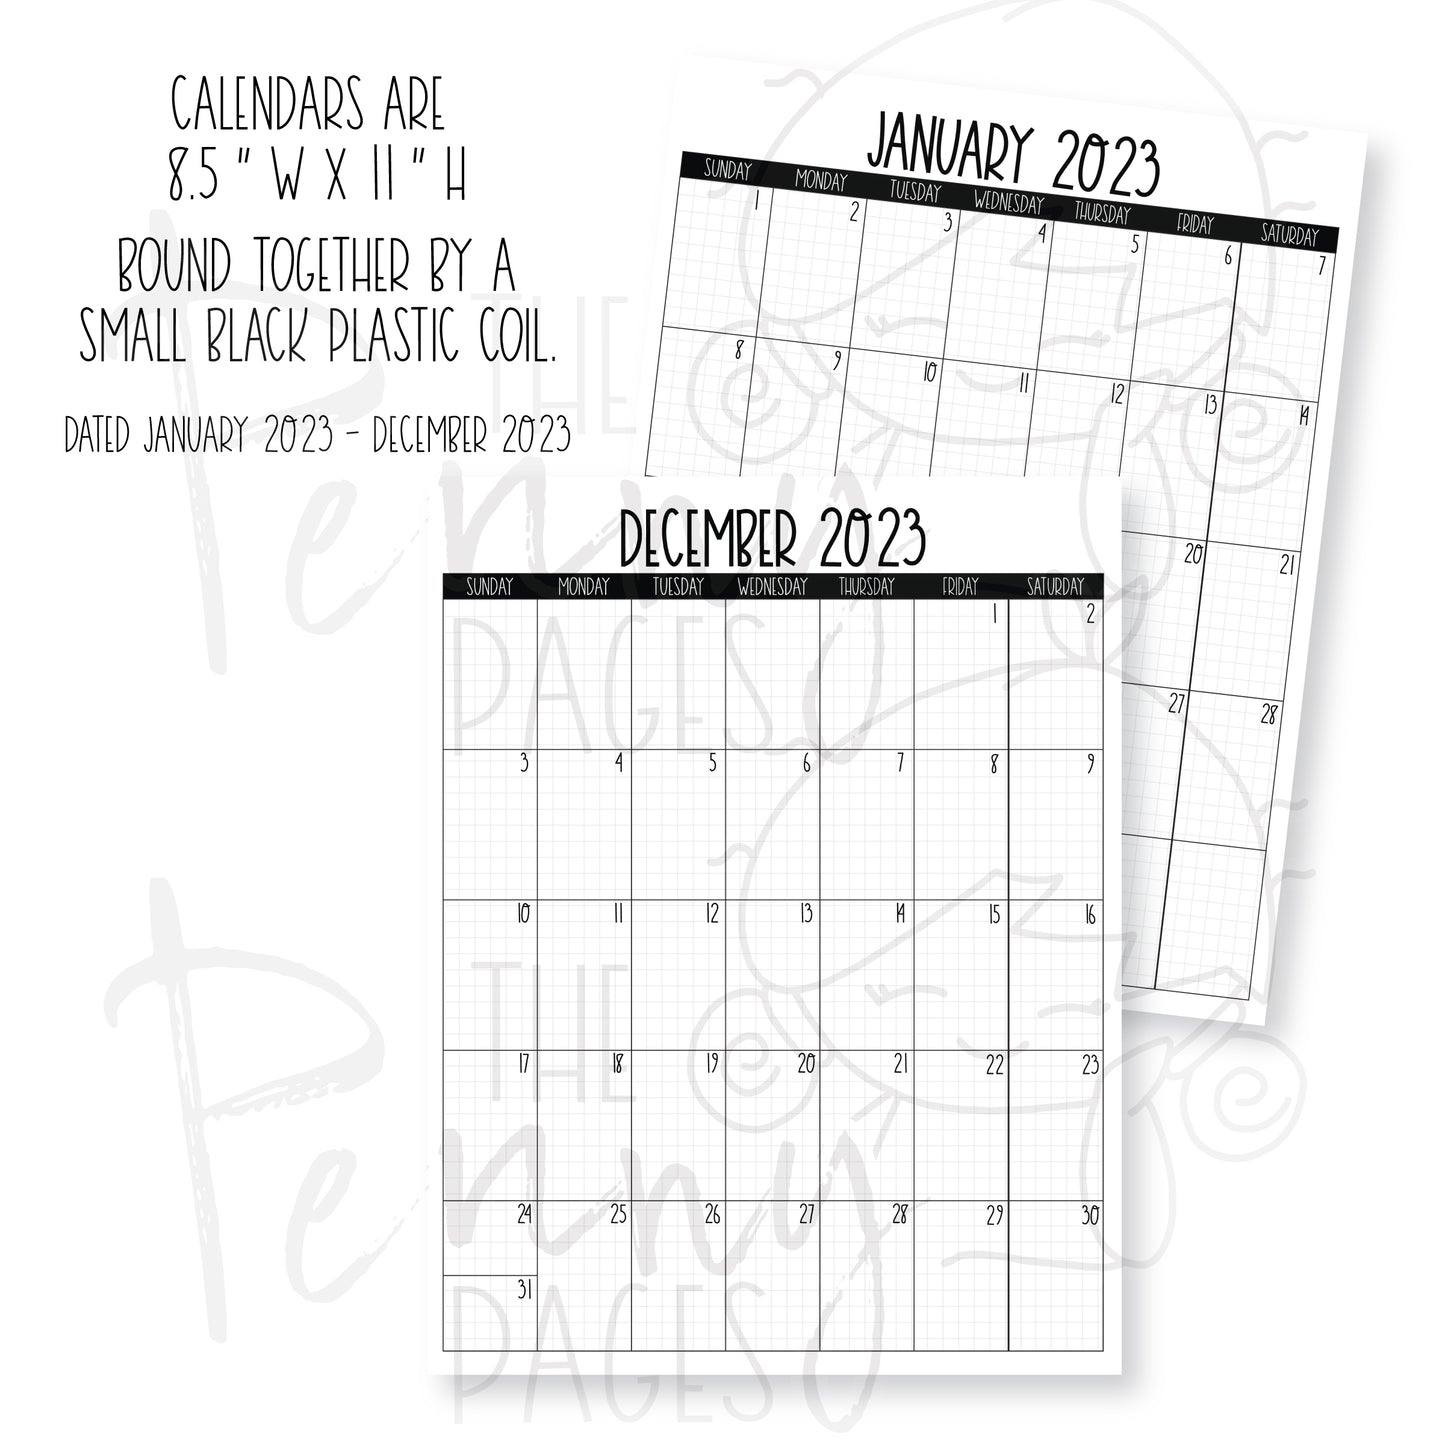 2023 Wall Calendars - 2 styles to choose from